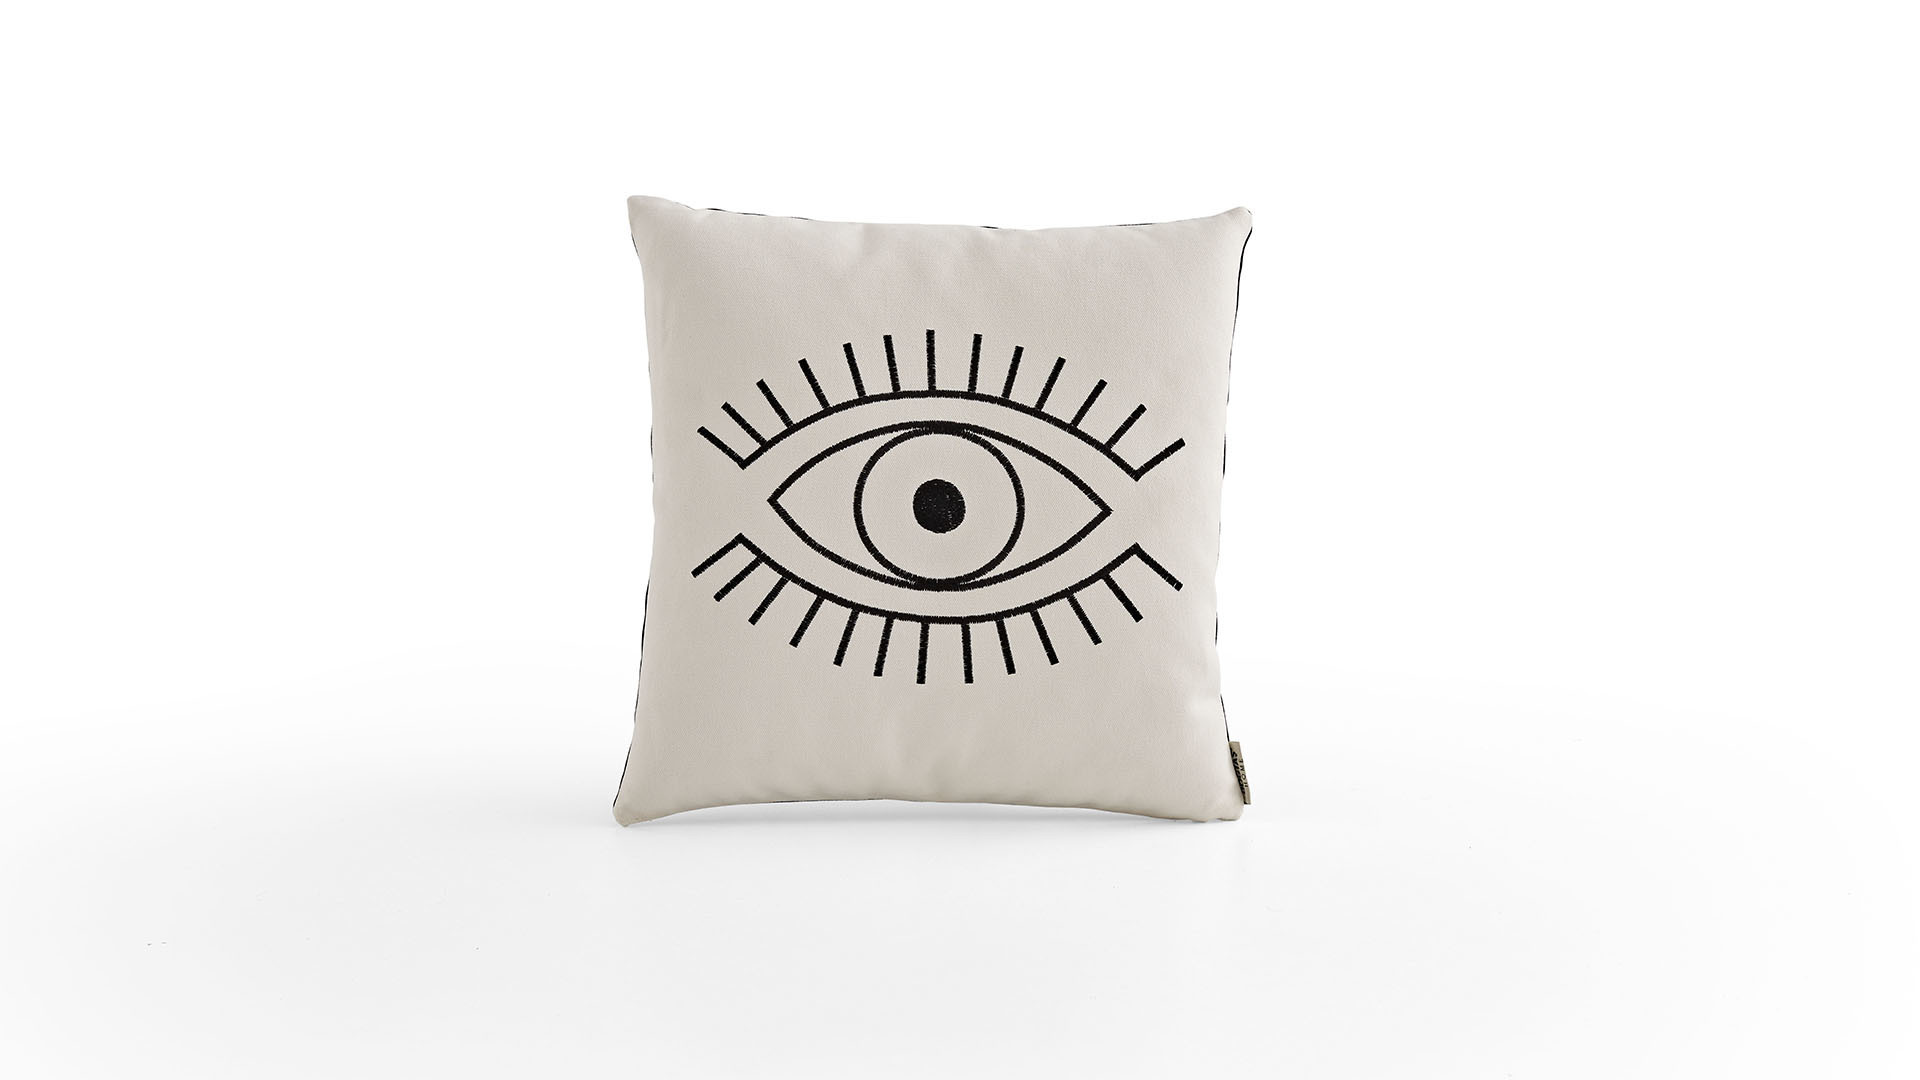 Embroidery Eyes Lace Pillow